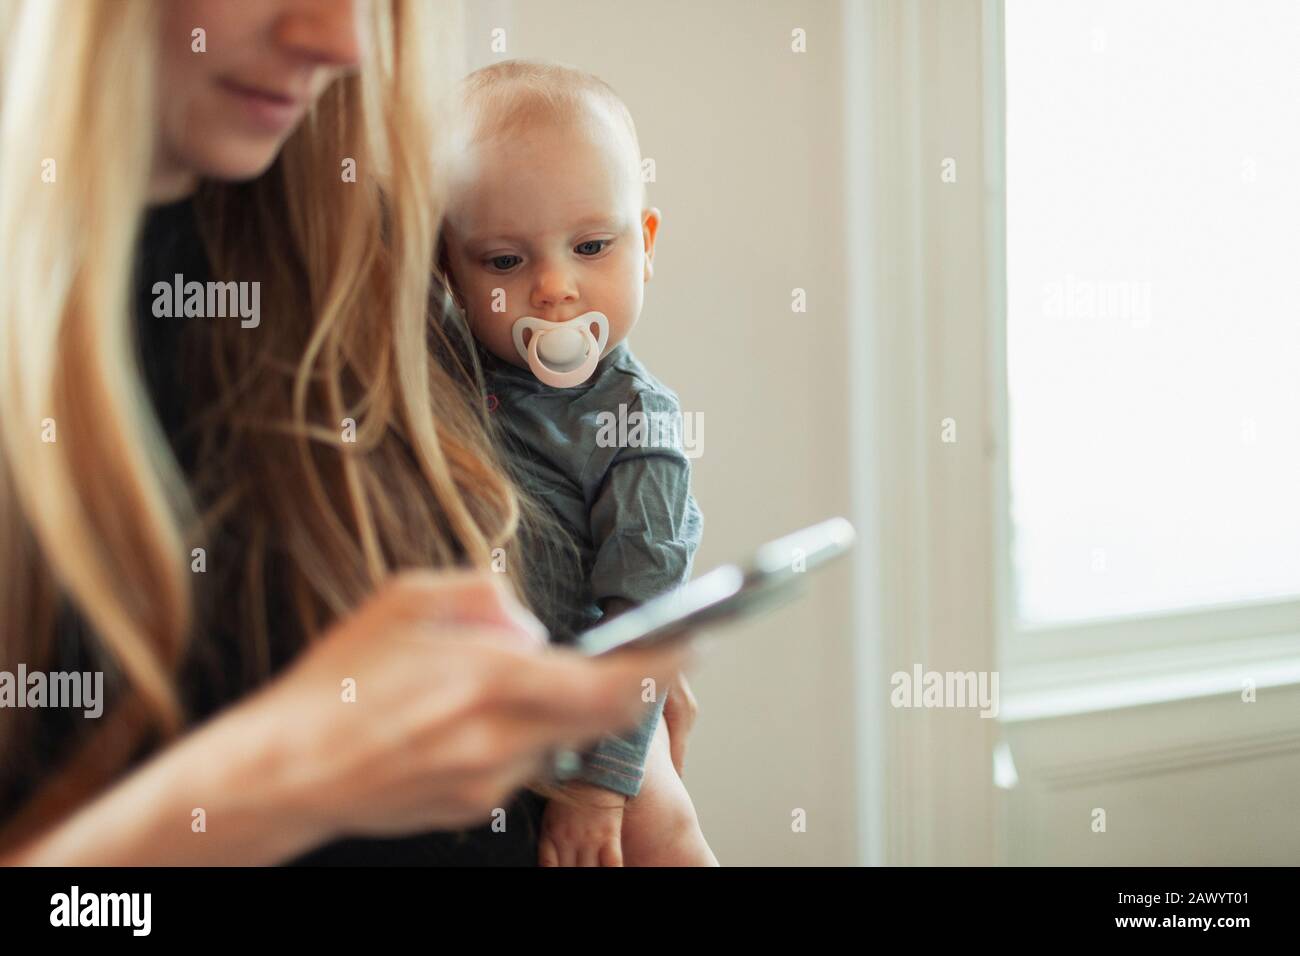 Curious baby girl with pacifier watching mother using smart phone Stock Photo